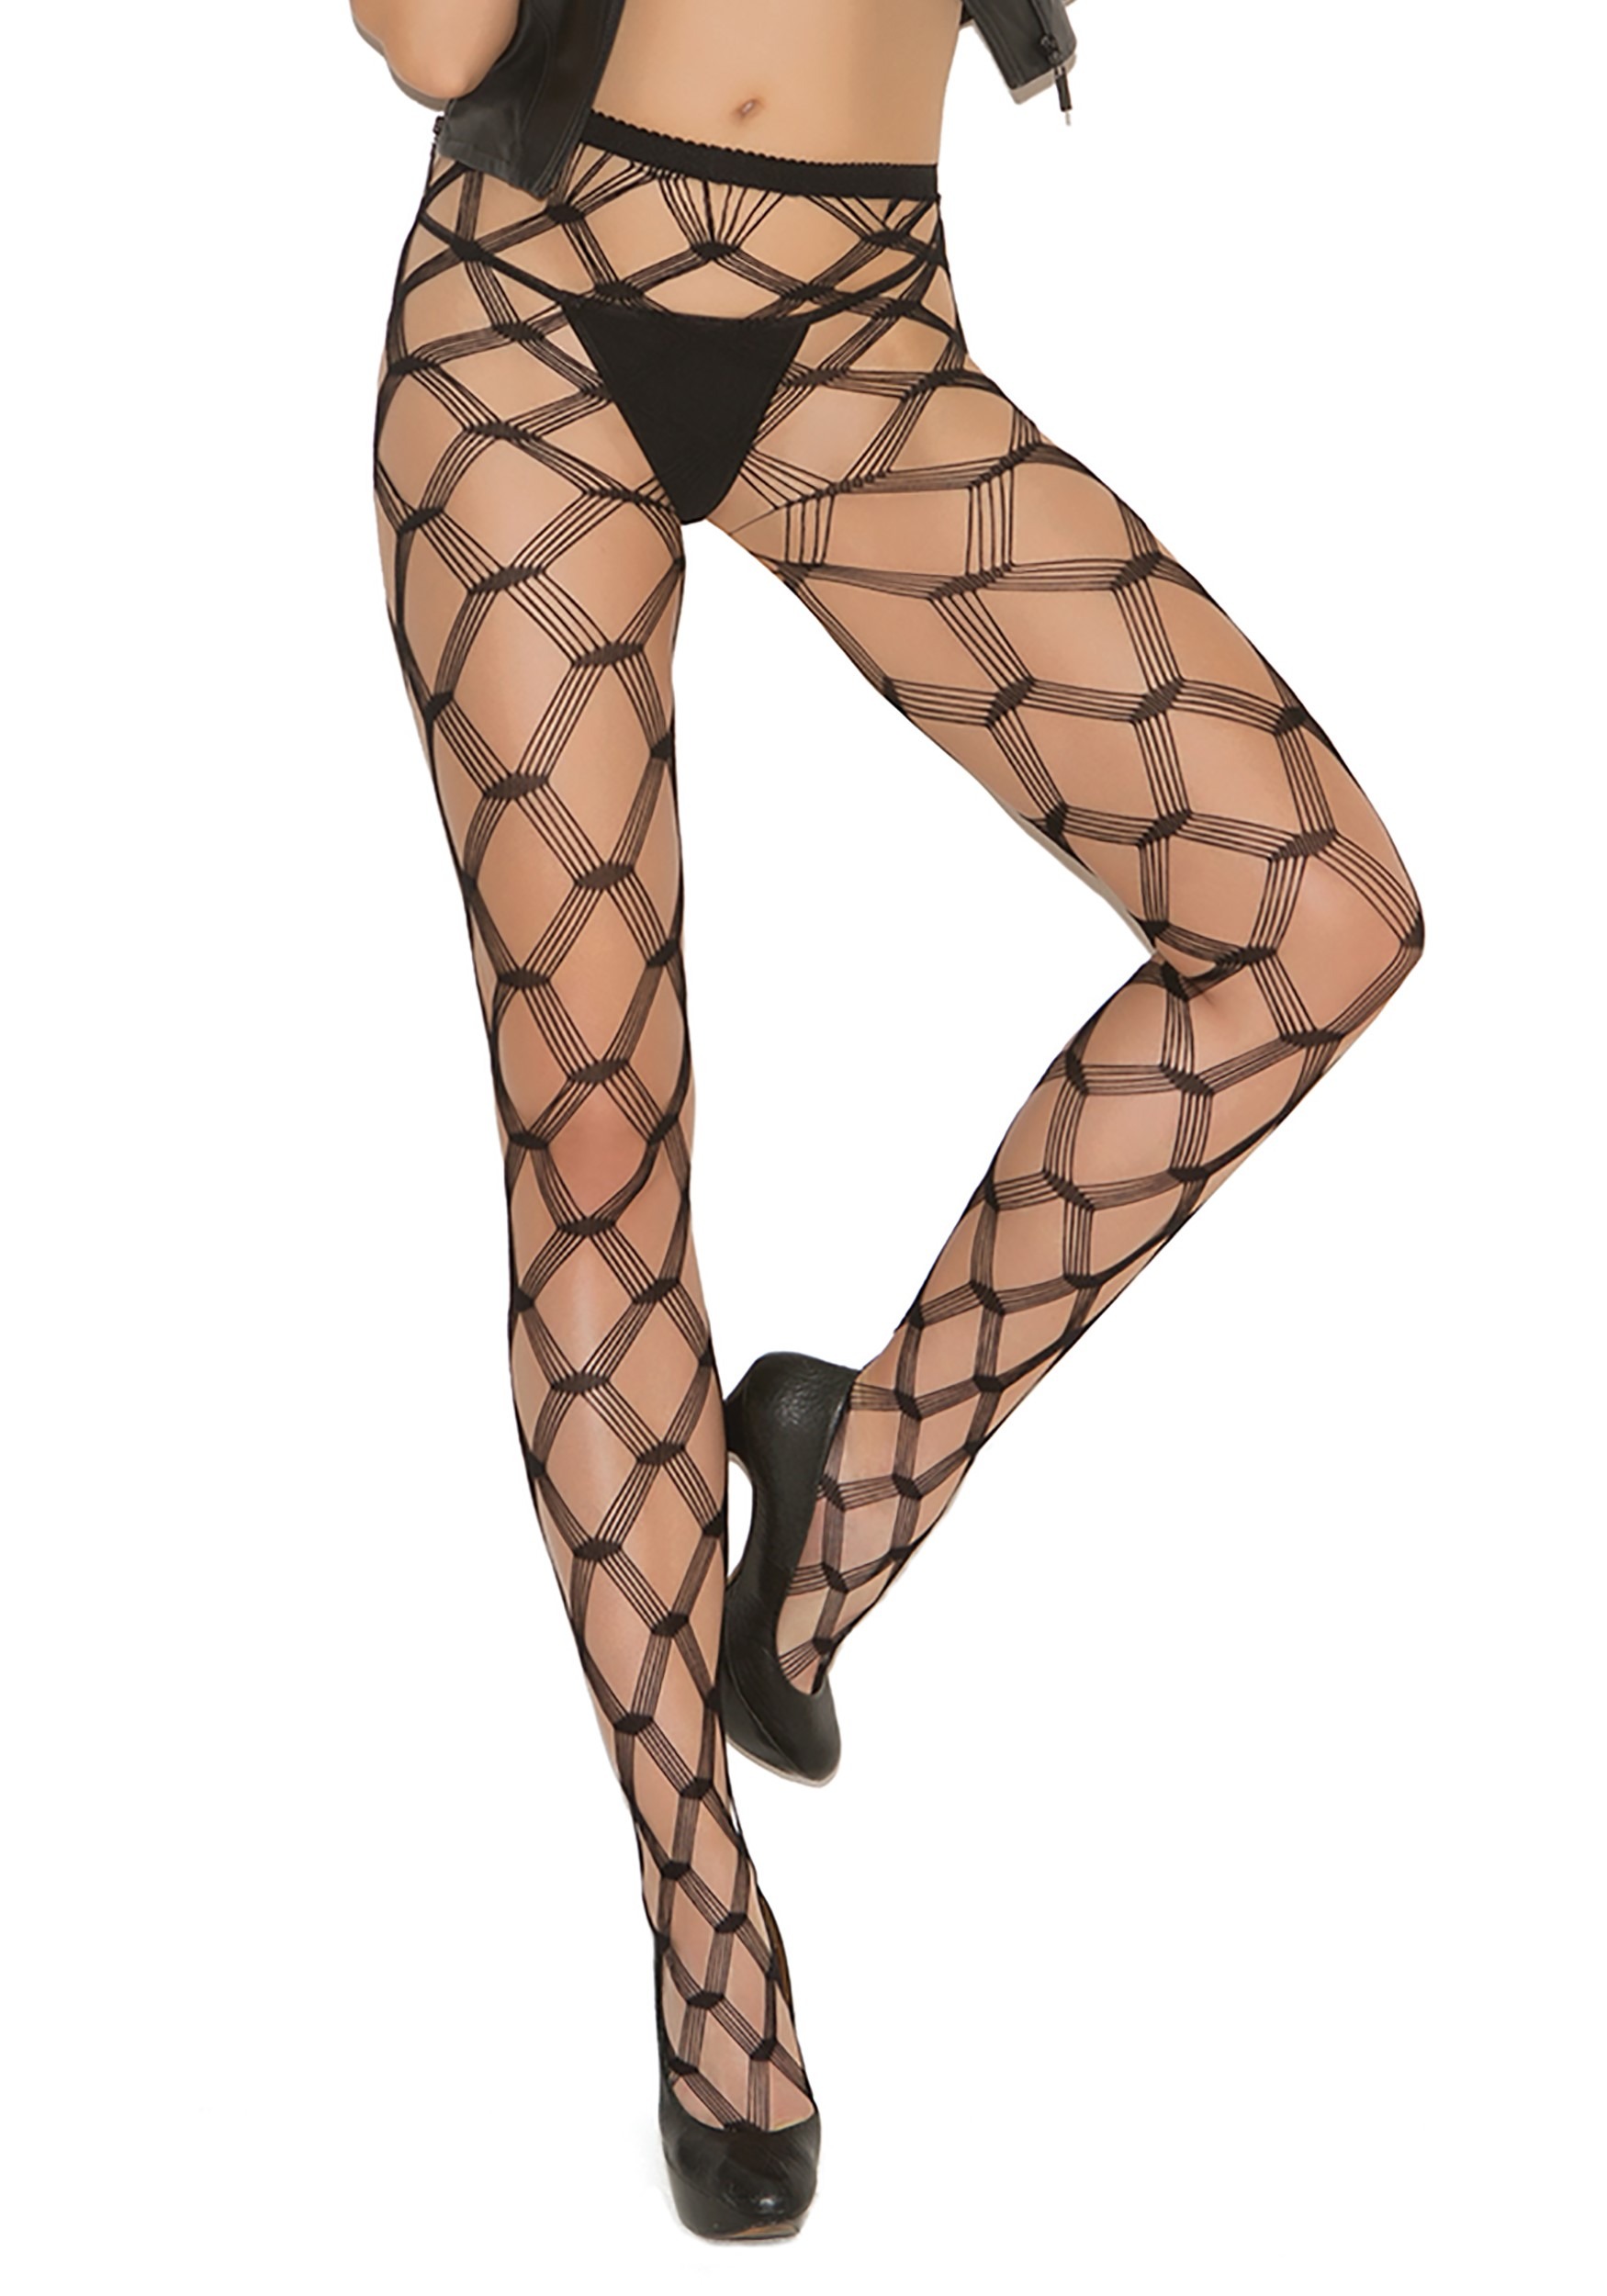 https://images.halloween.com/products/67220/1-1/womens-seamless-diamond-lace-pattern-tights.jpg